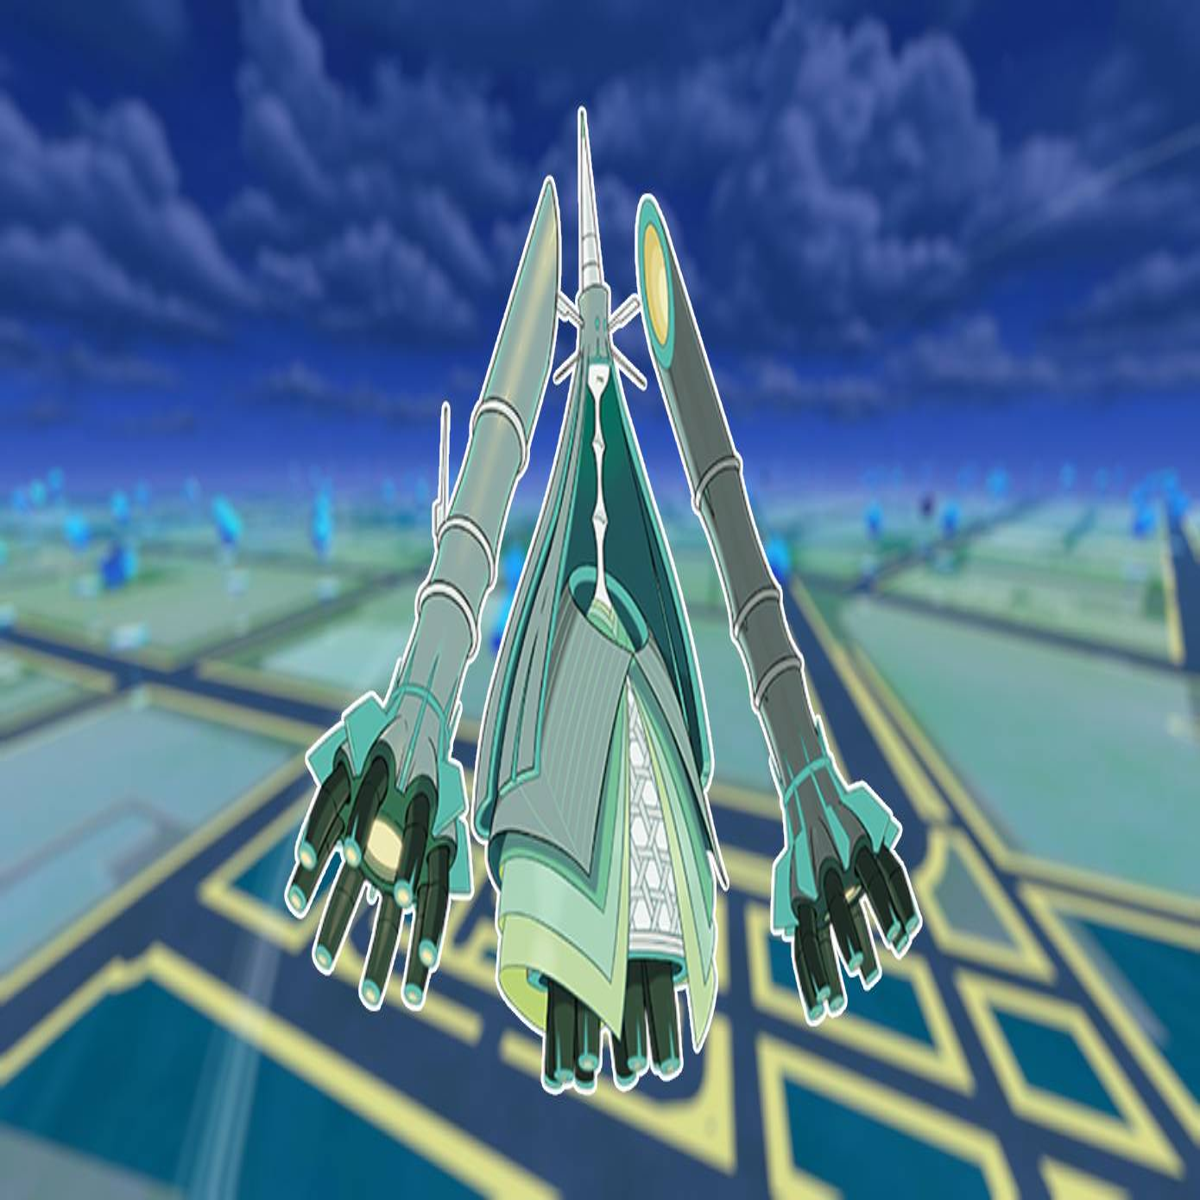 Pokemon GO Celesteela PvP and PvE guide: Best moveset, counters, and more